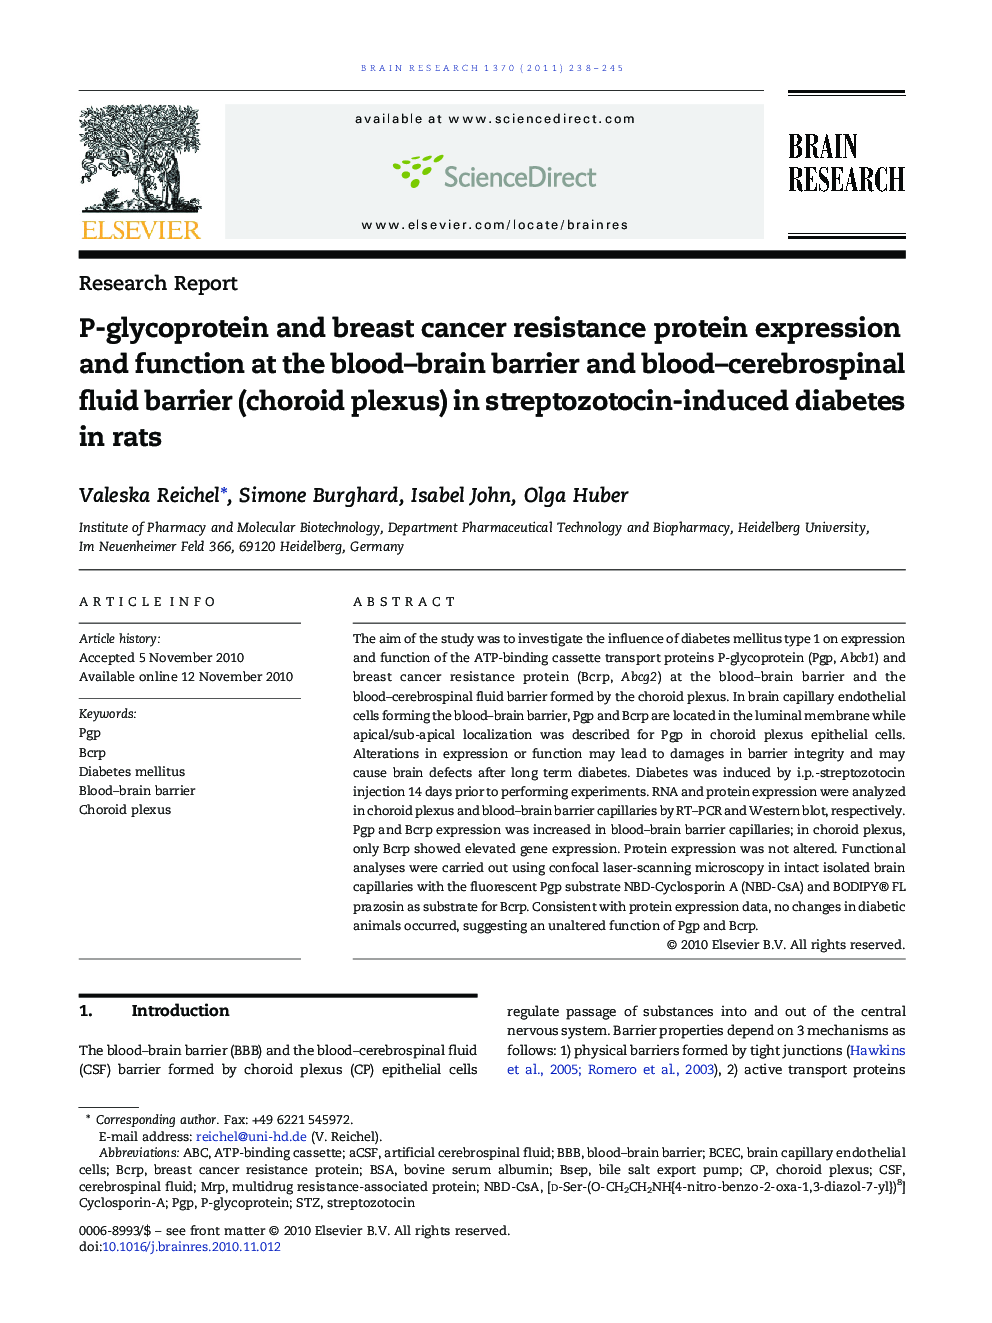 Research ReportP-glycoprotein and breast cancer resistance protein expression and function at the blood-brain barrier and blood-cerebrospinal fluid barrier (choroid plexus) in streptozotocin-induced diabetes in rats